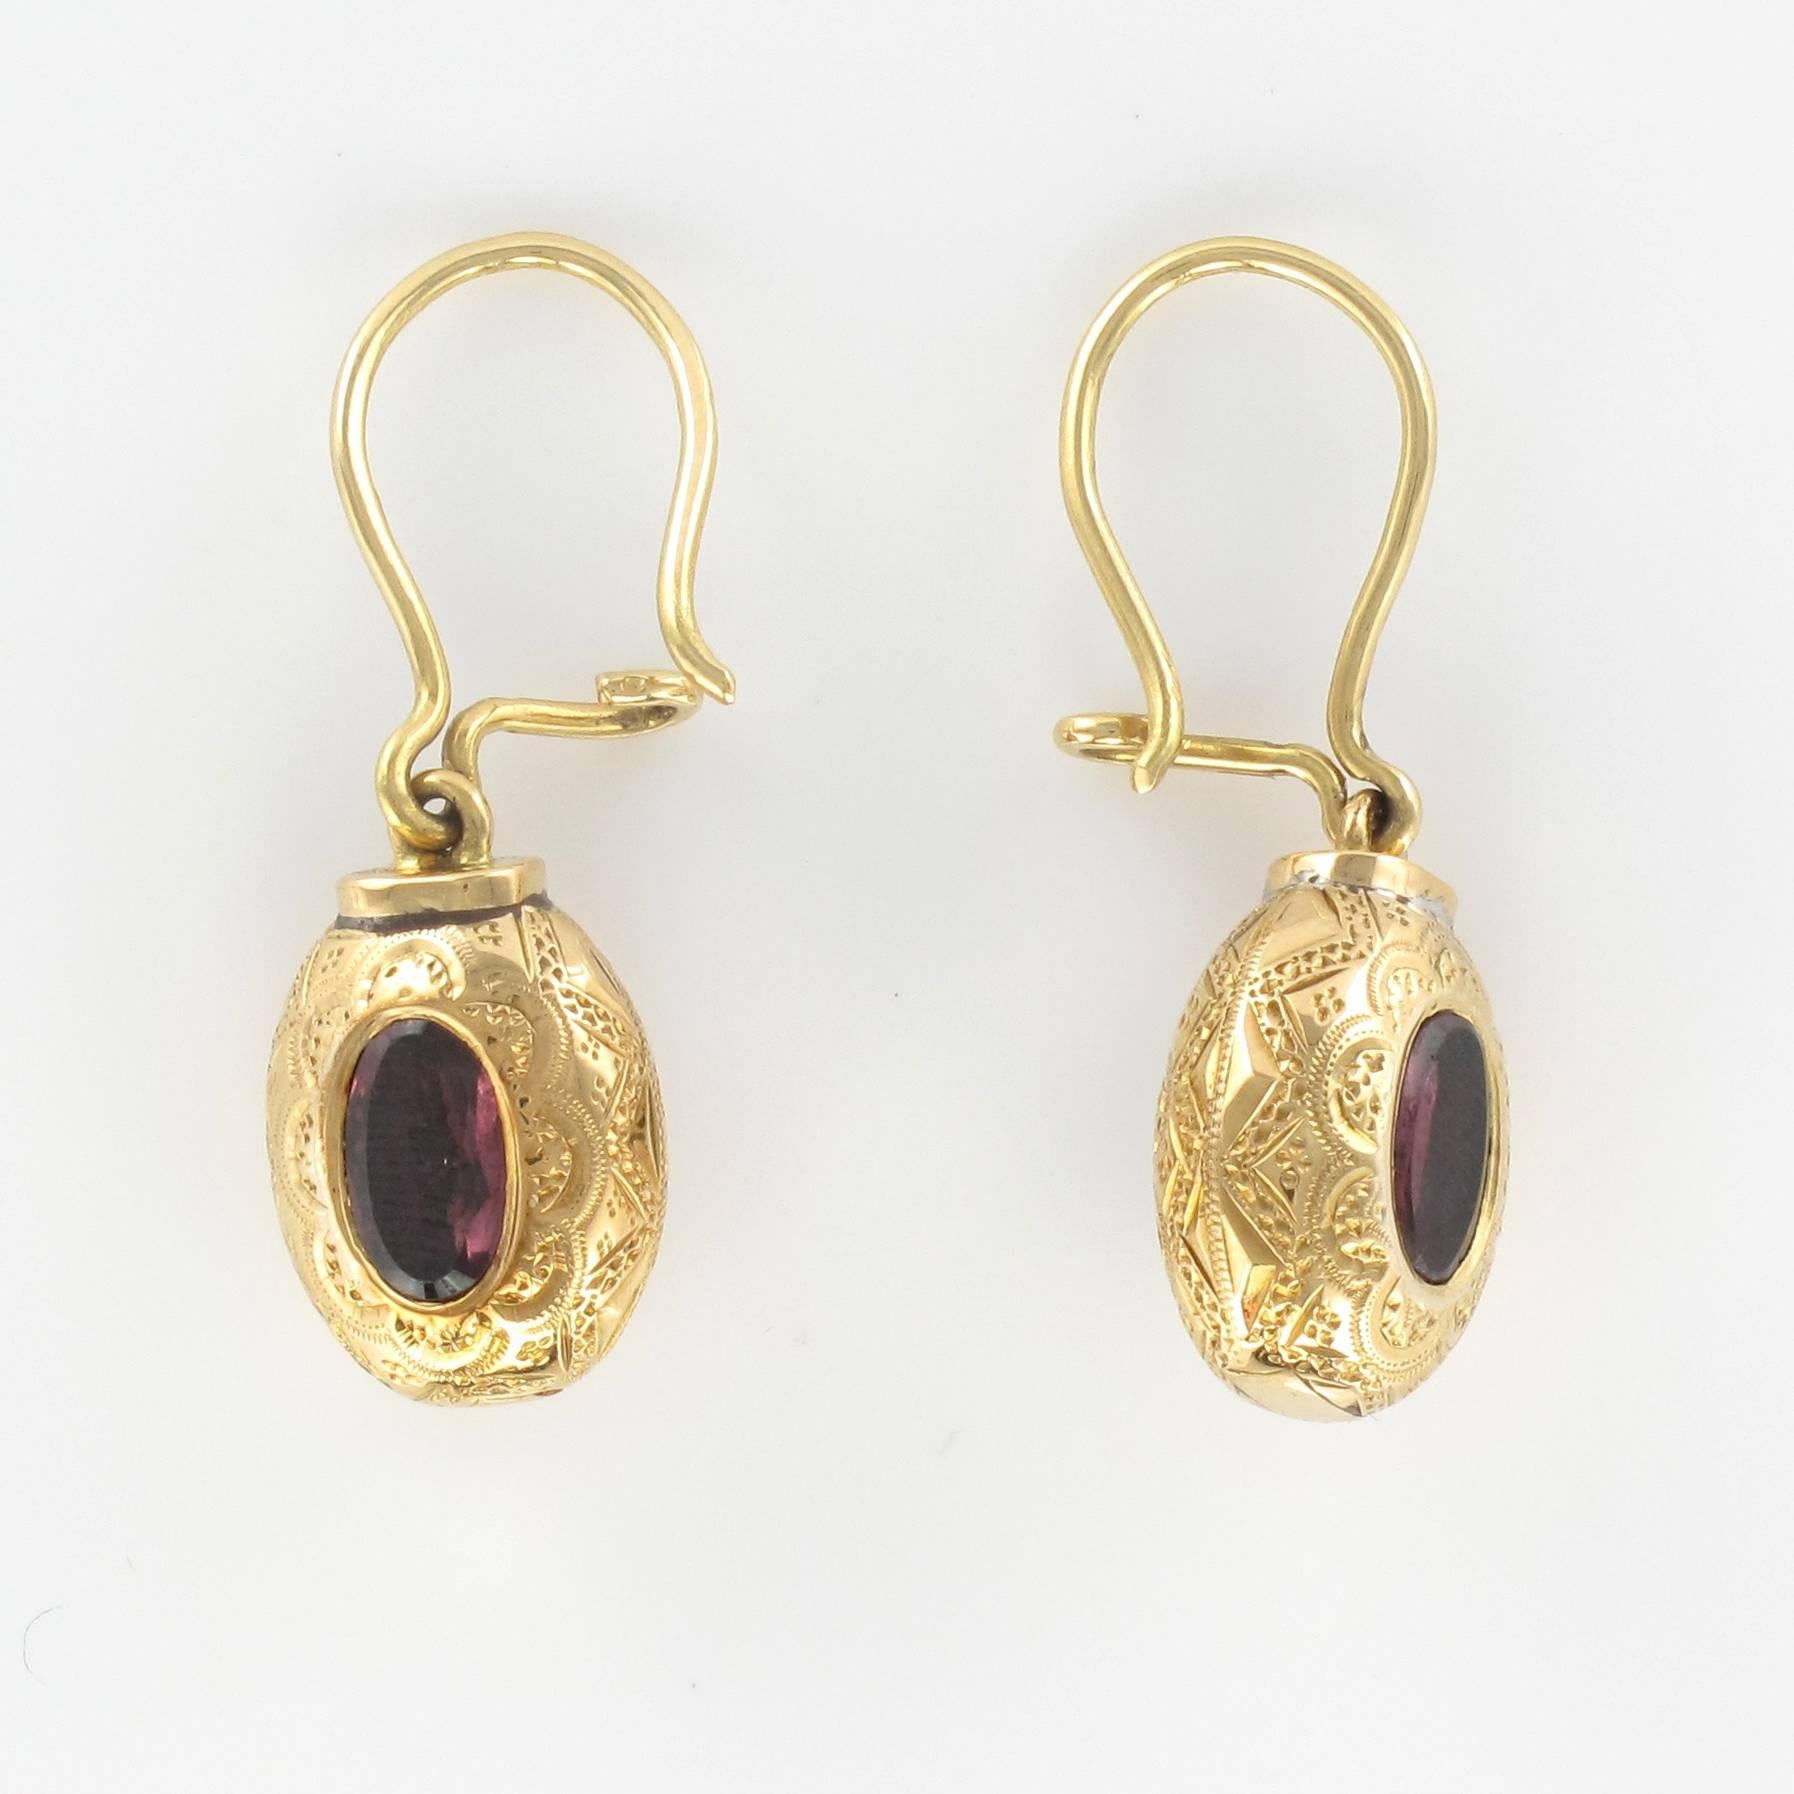 Earrings in 18 carat yellow gold. 

Each of these antique earrings is formed of a finely engraved oval design set with a central garnet. The clasps are goosenecks with safety hooks. 

Height: 2.9 cm, width at widest: 0.97 cm.
Weight: about 4.1